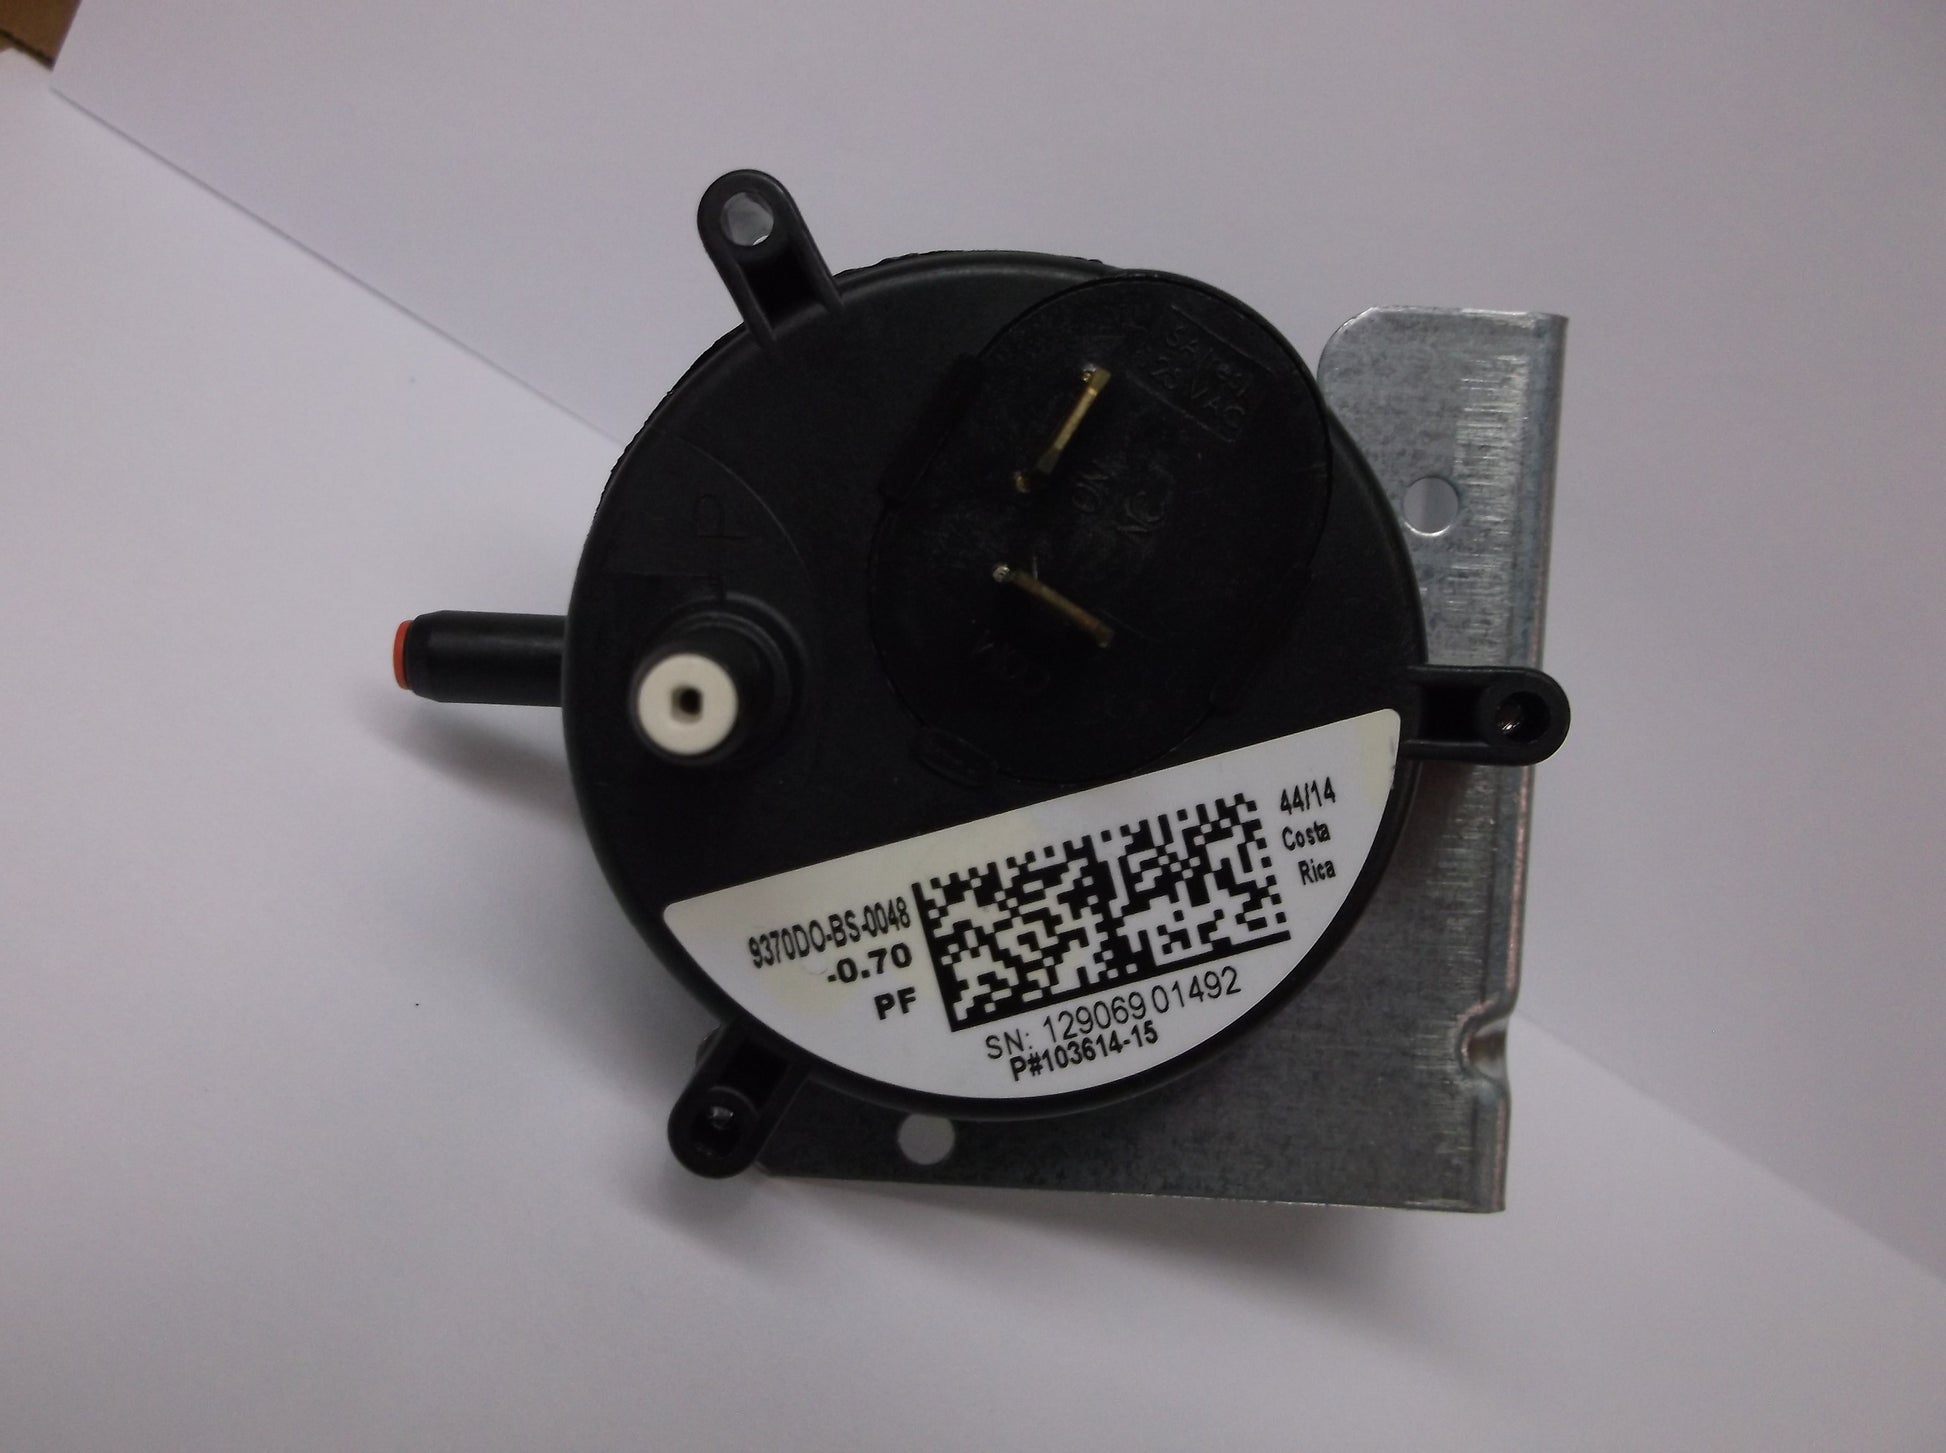 PRESSURE SWITCH ASSEMBLY  125VAC  -0.70" WC, 